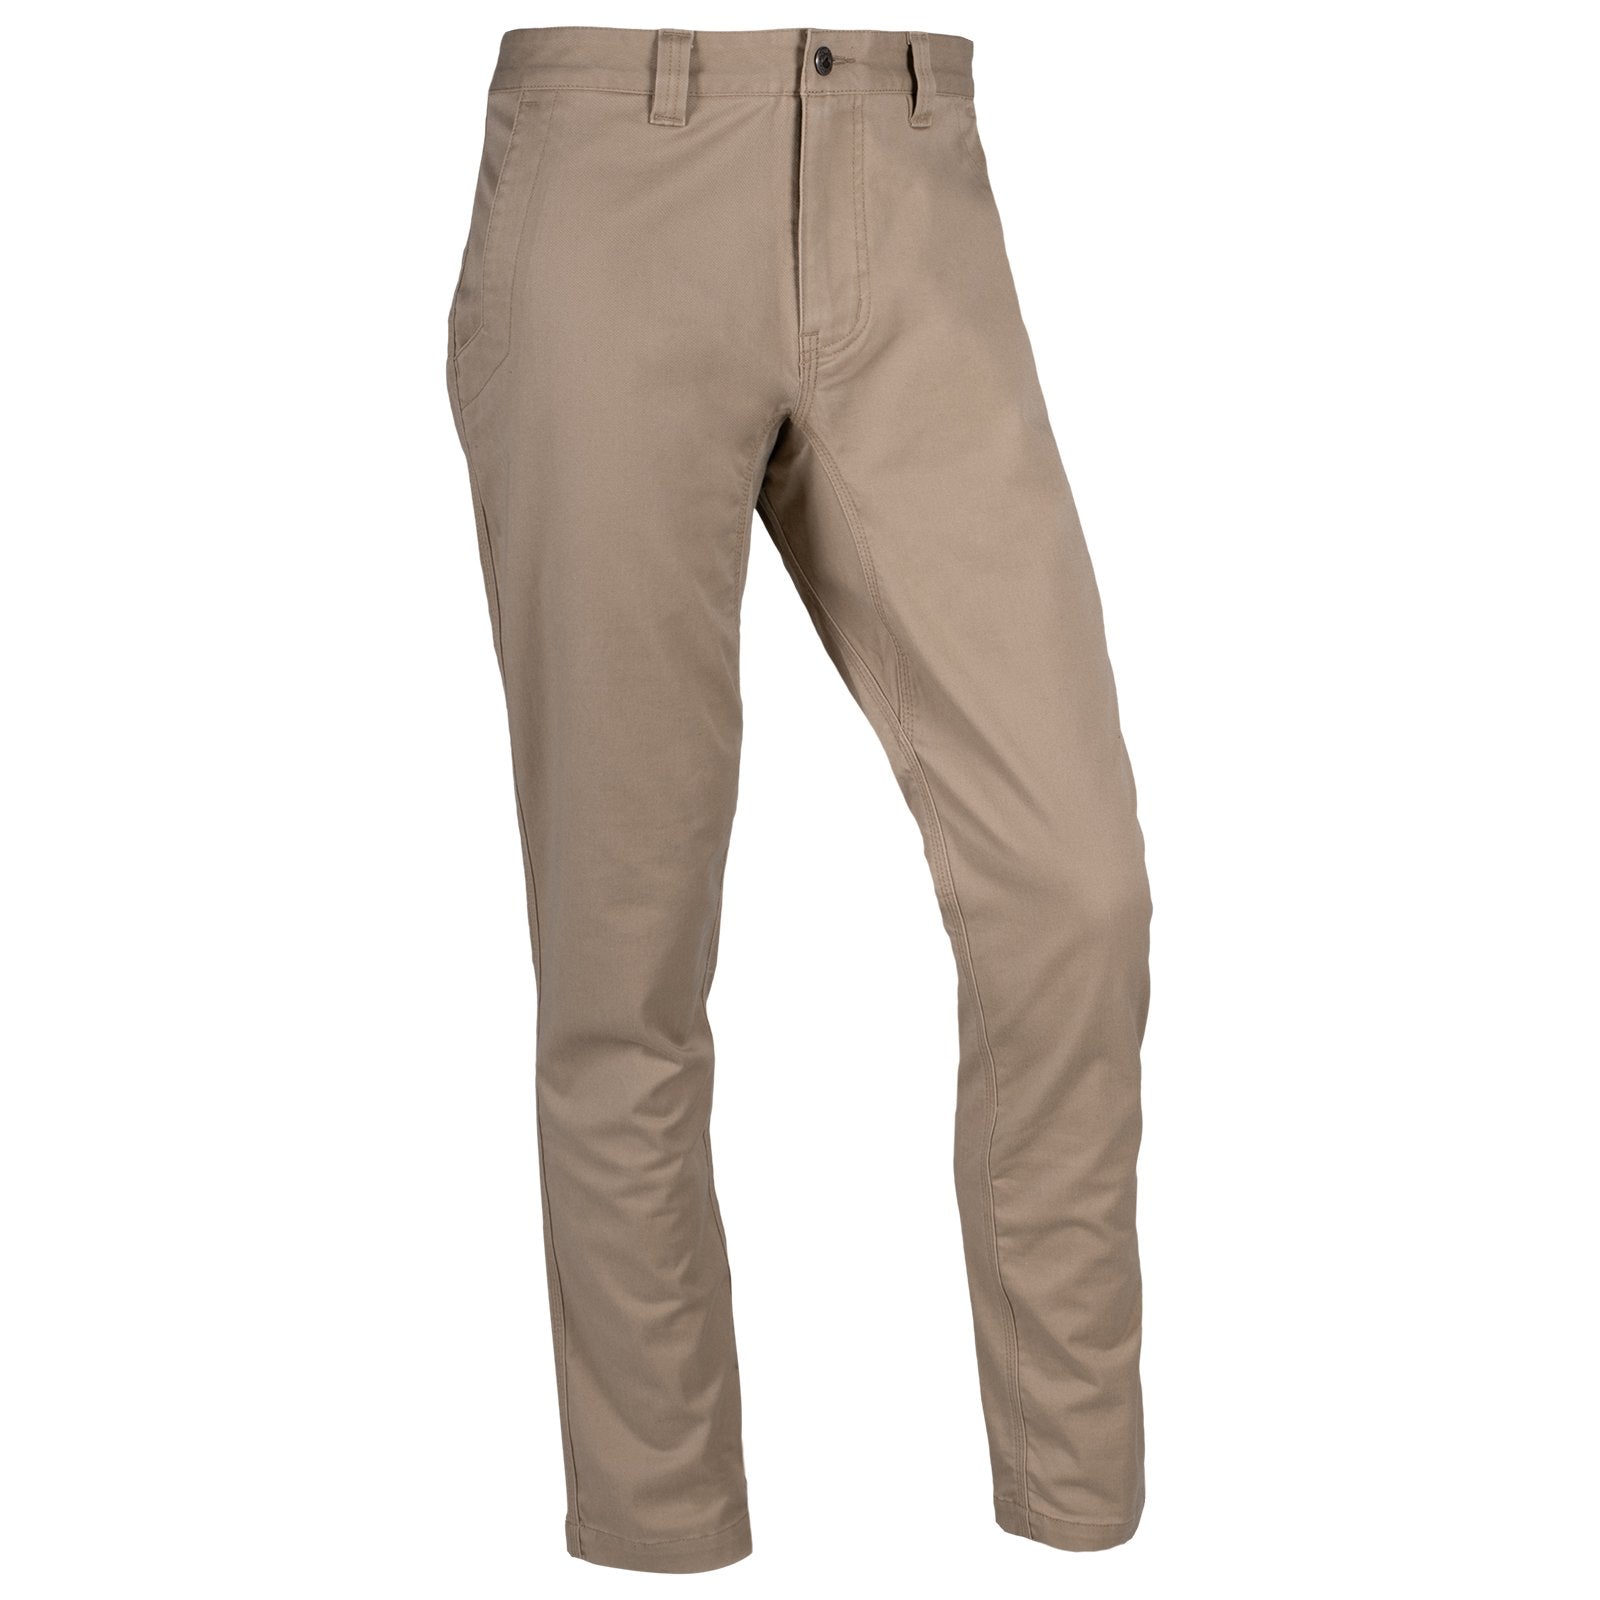 J.Lindeberg Axil Fleece Twill Pant Thermo Pants in navy buy online - Golf  House